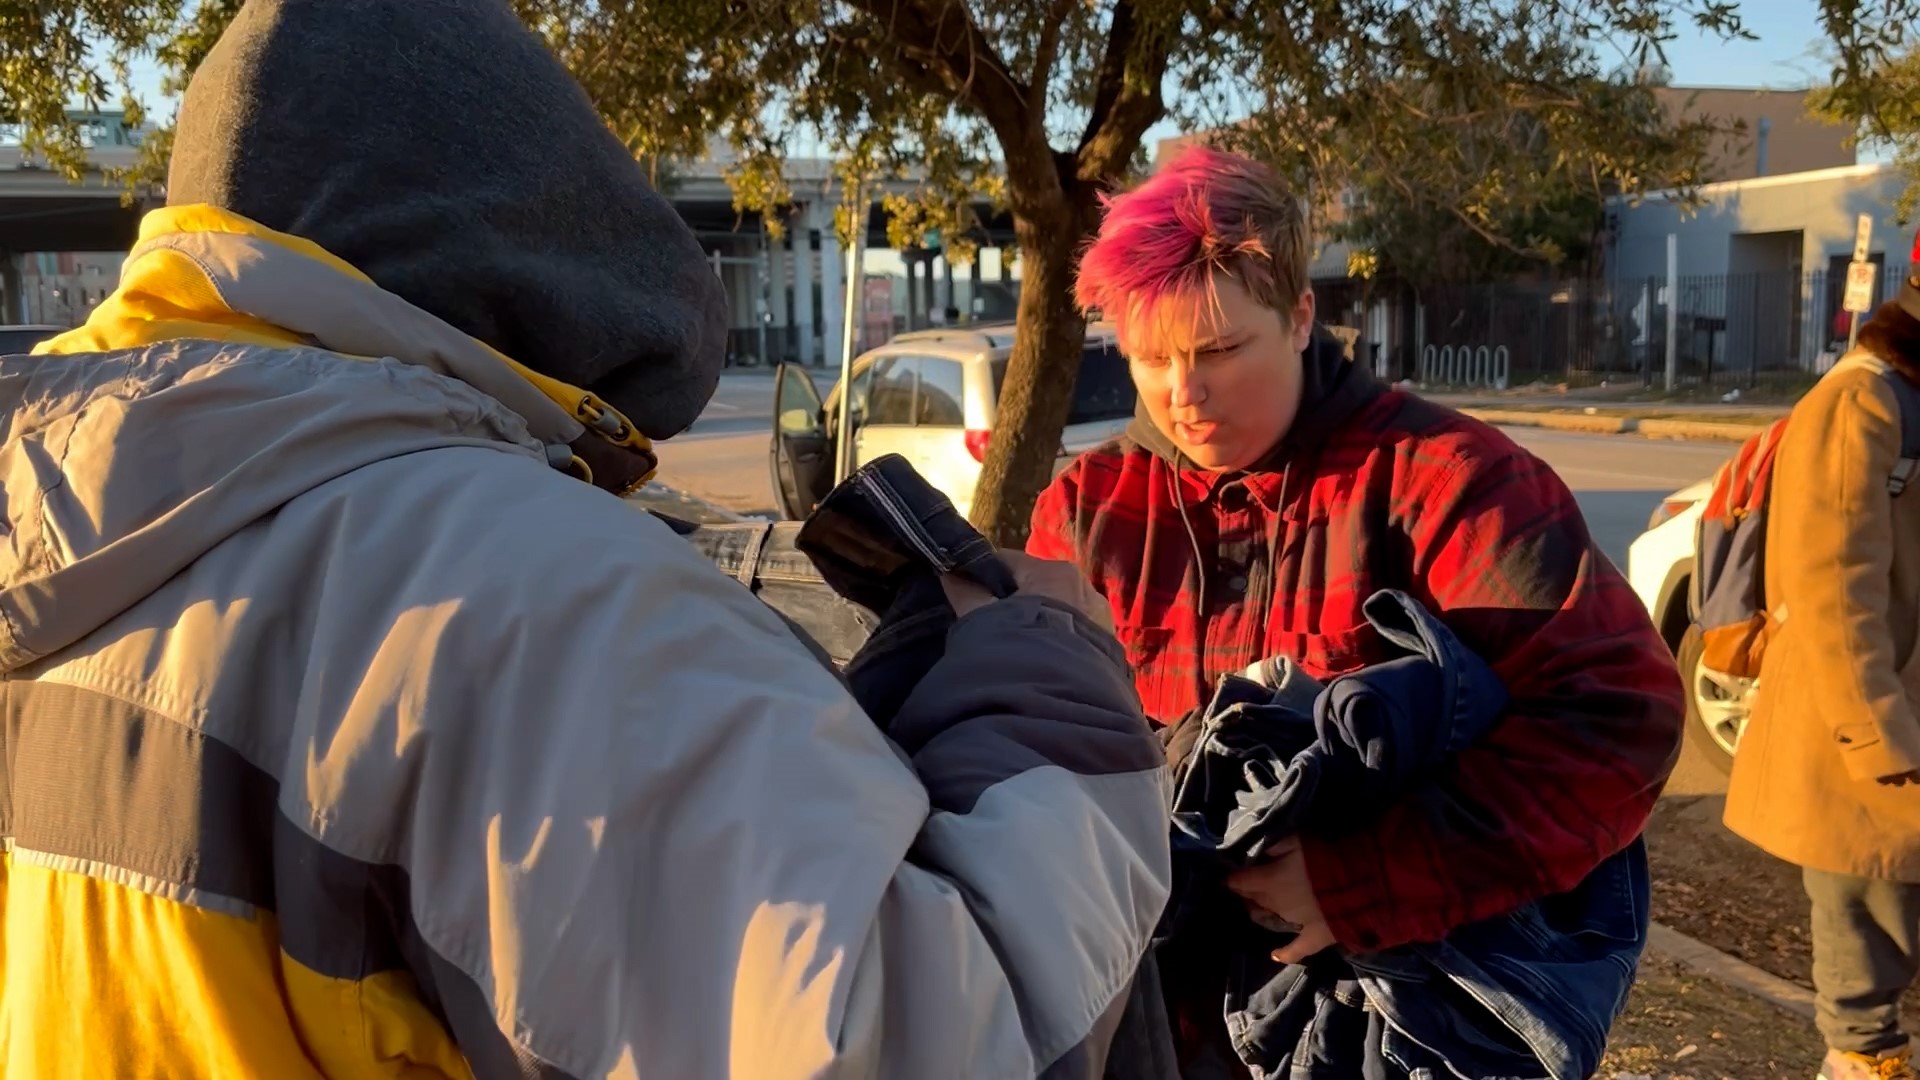 Pearland woman donates clothes, blankets to homeless in Houston